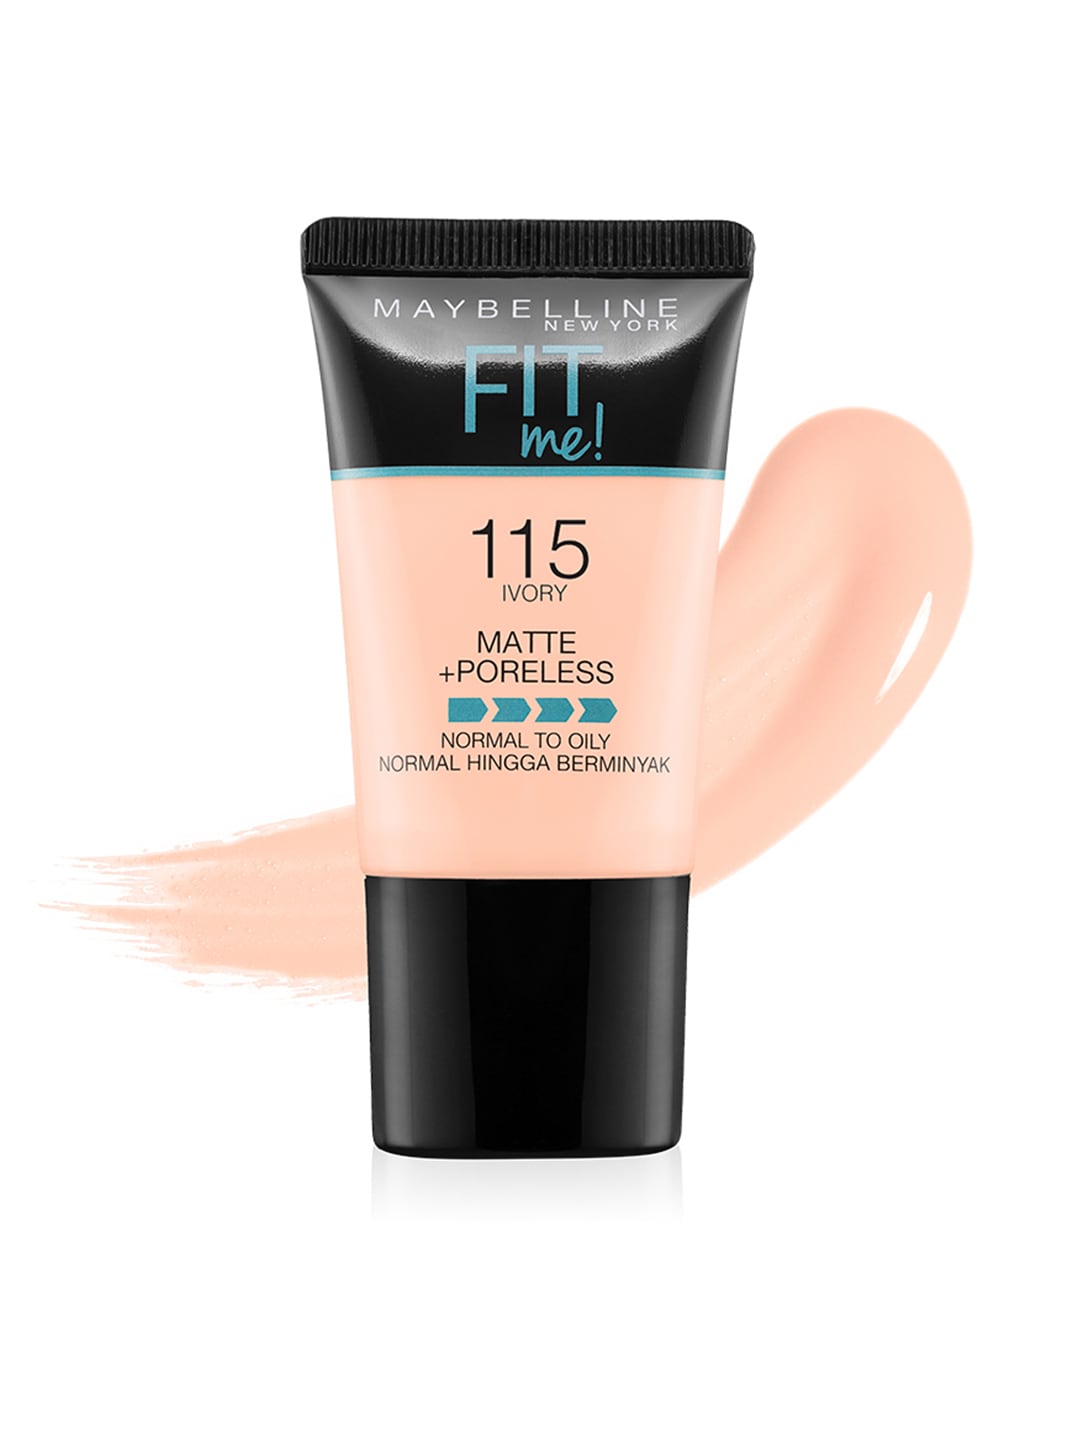 Maybelline New York Fit Me Matte+Poreless Foundation SPF 22 - 115 Ivory With Clay 18 ml Price in India